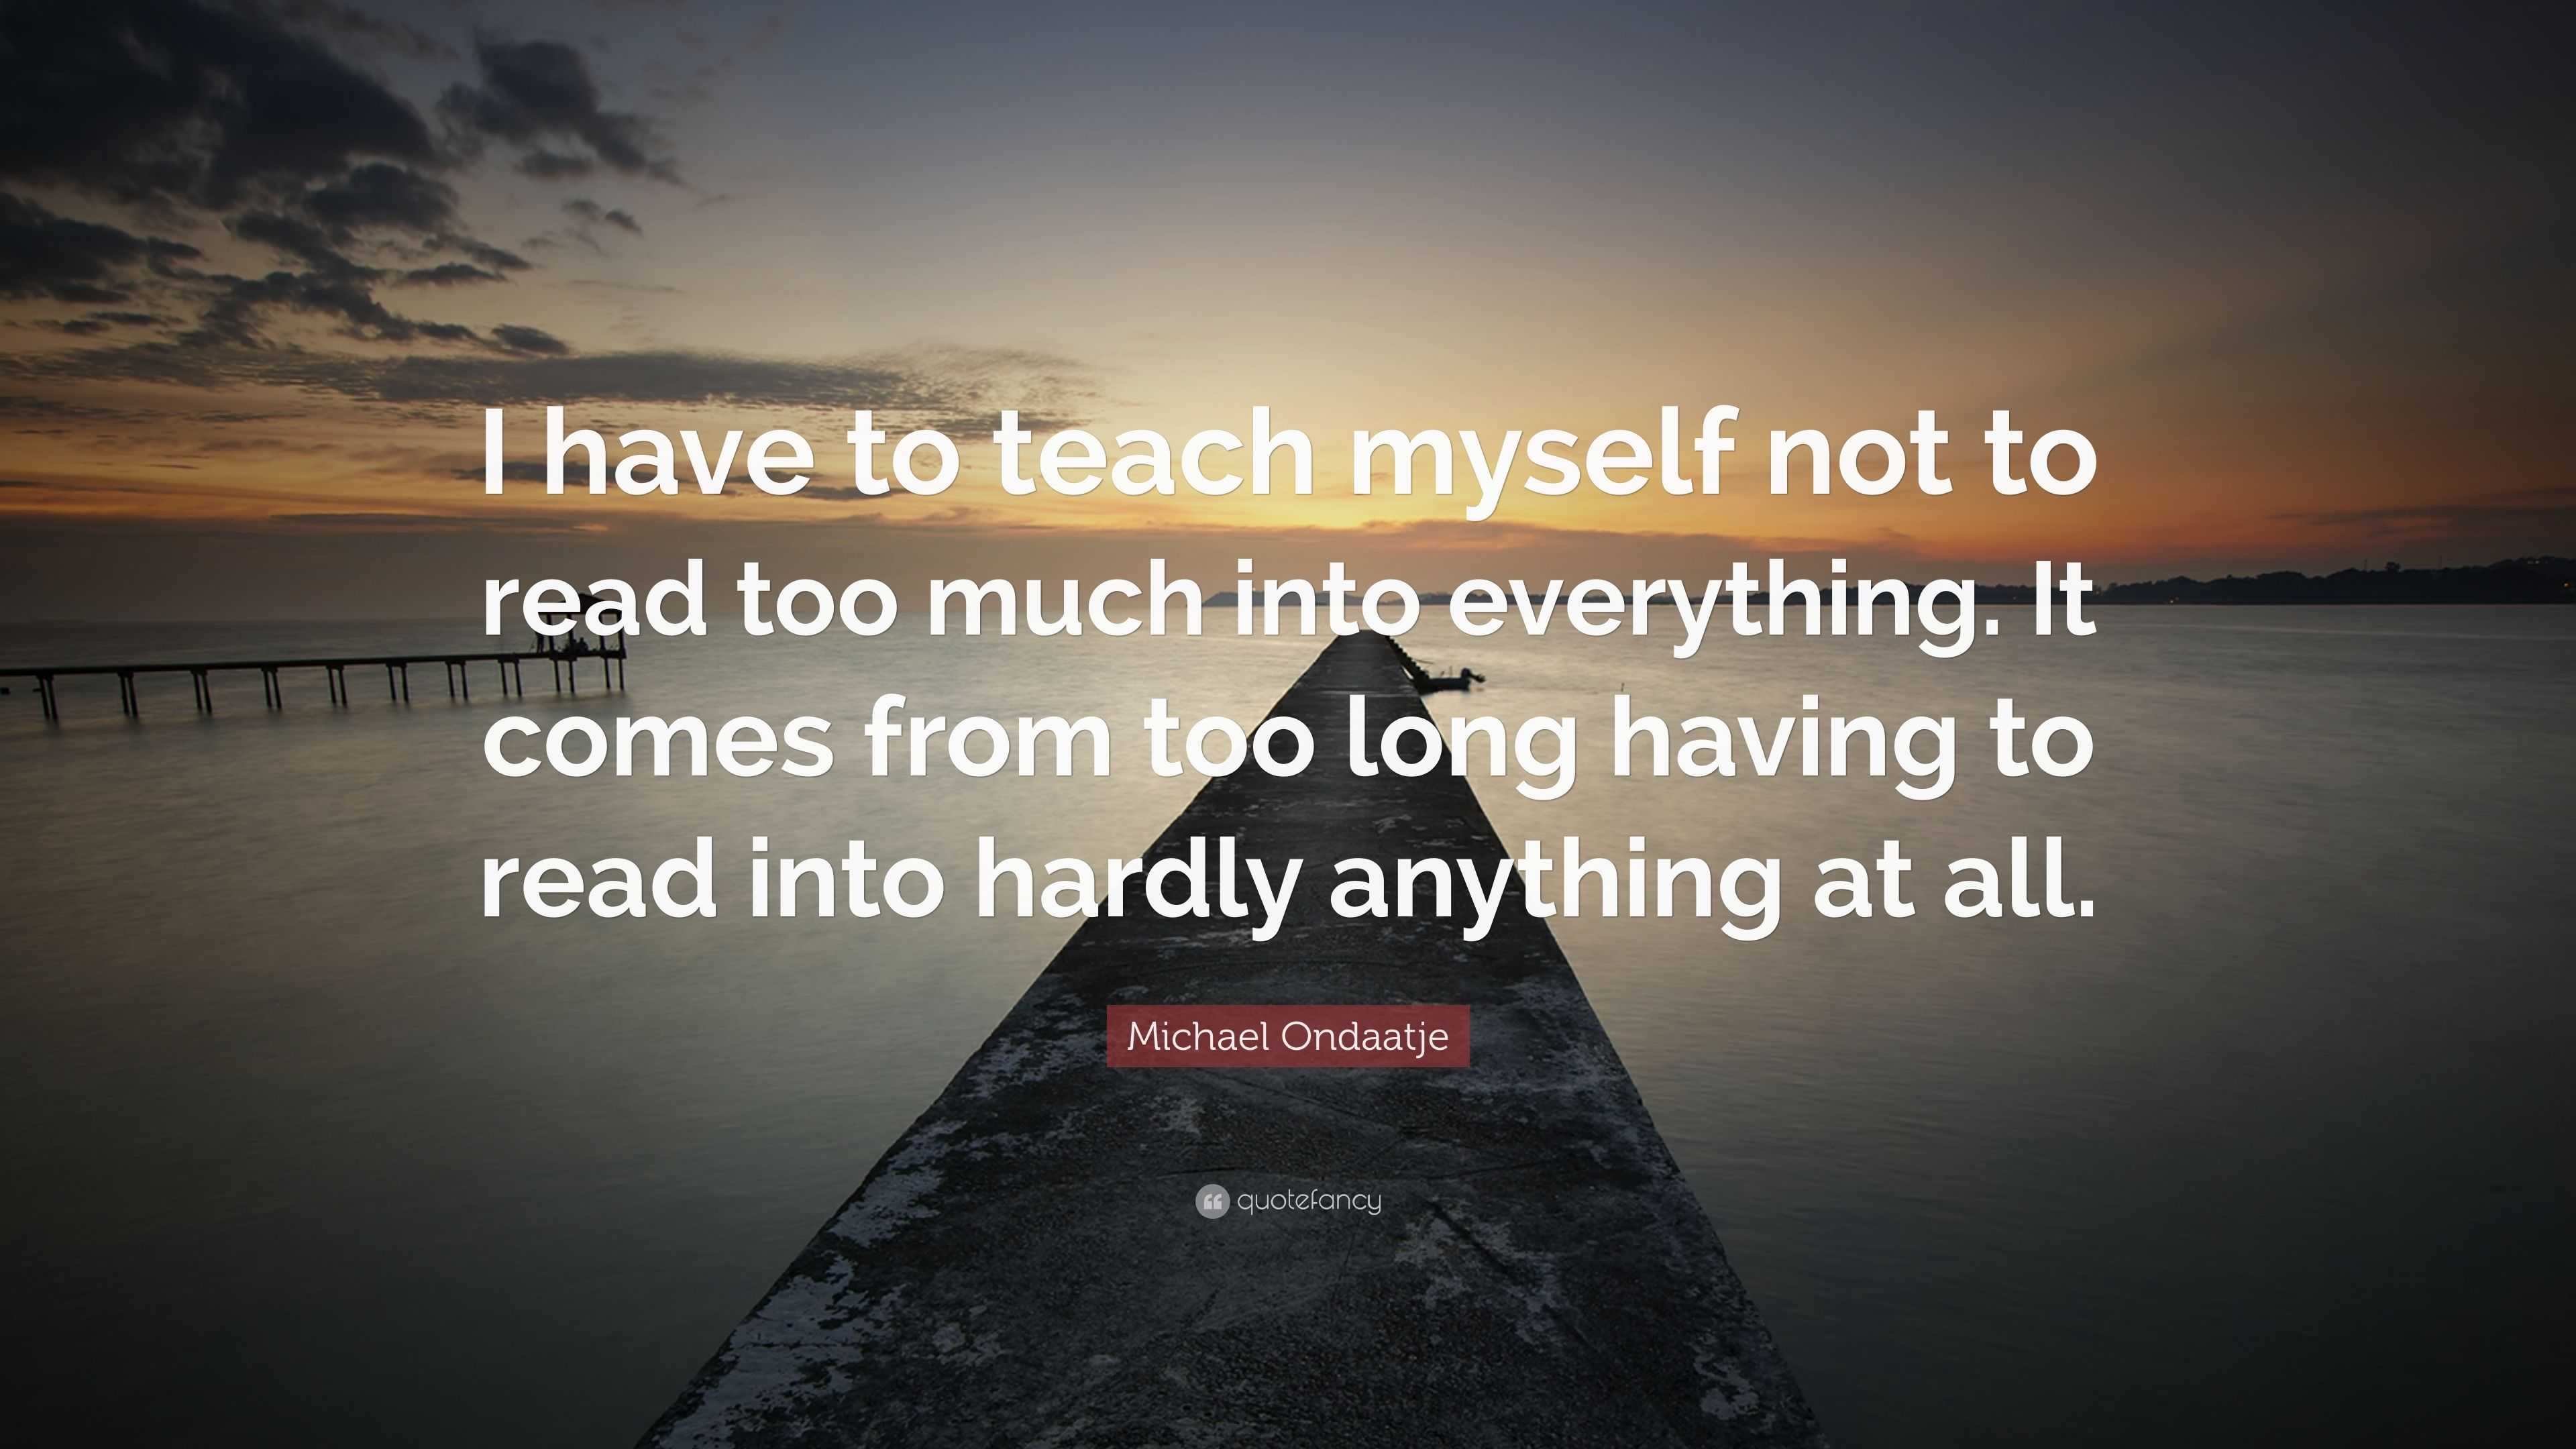 Michael Ondaatje Quote: “I have to teach myself not to read too much ...